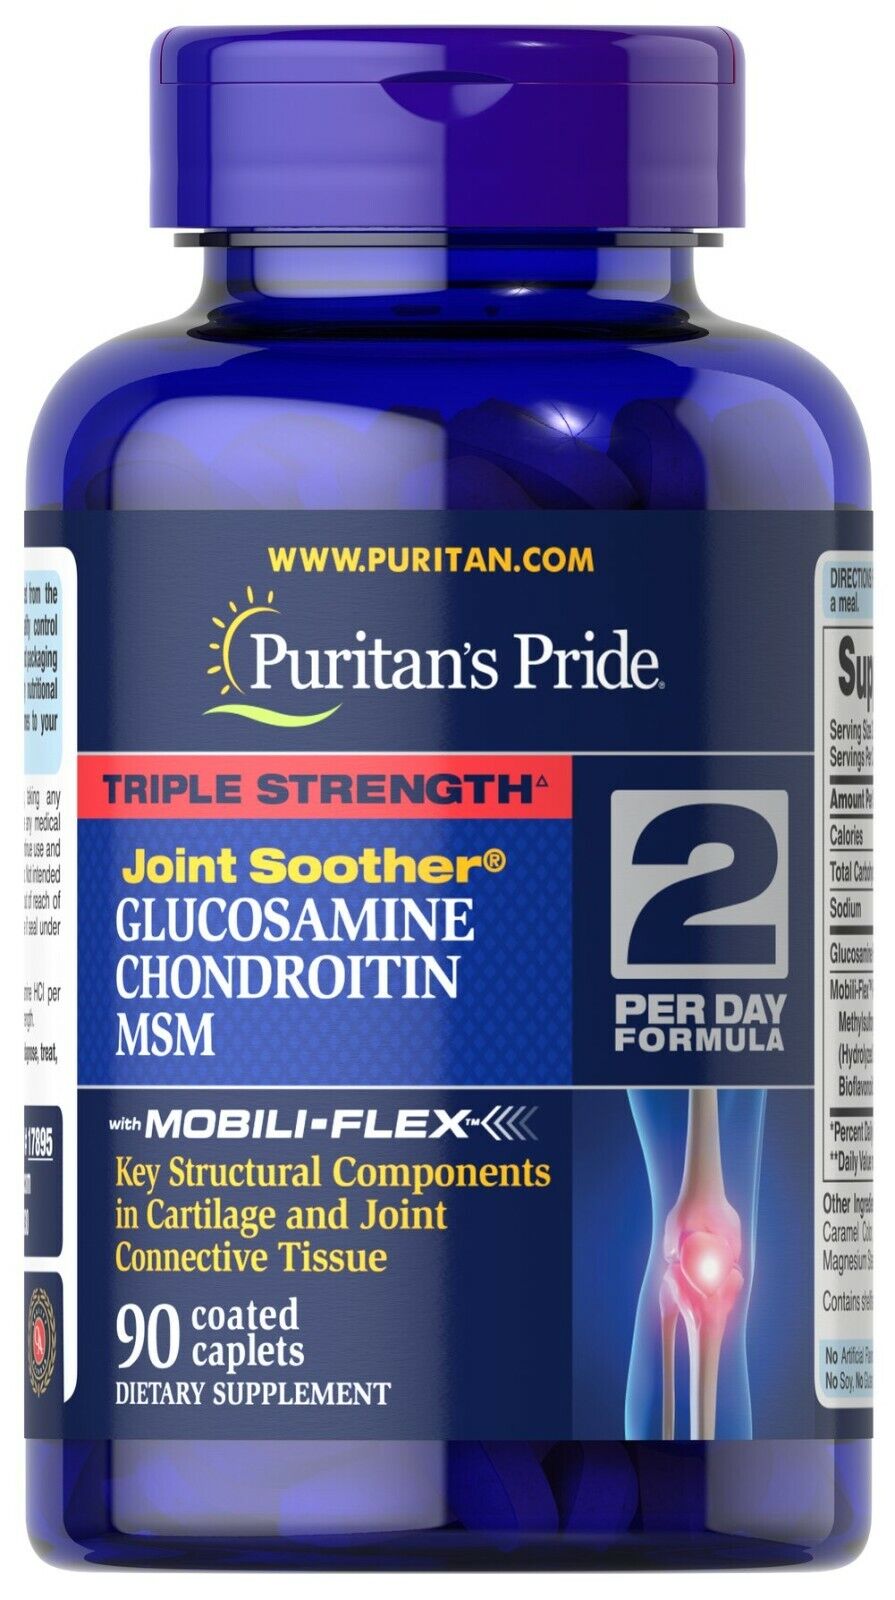 Puritan's Pride Triple Strength Glucosamine, Chondroitin & MSM Joint Soother 90